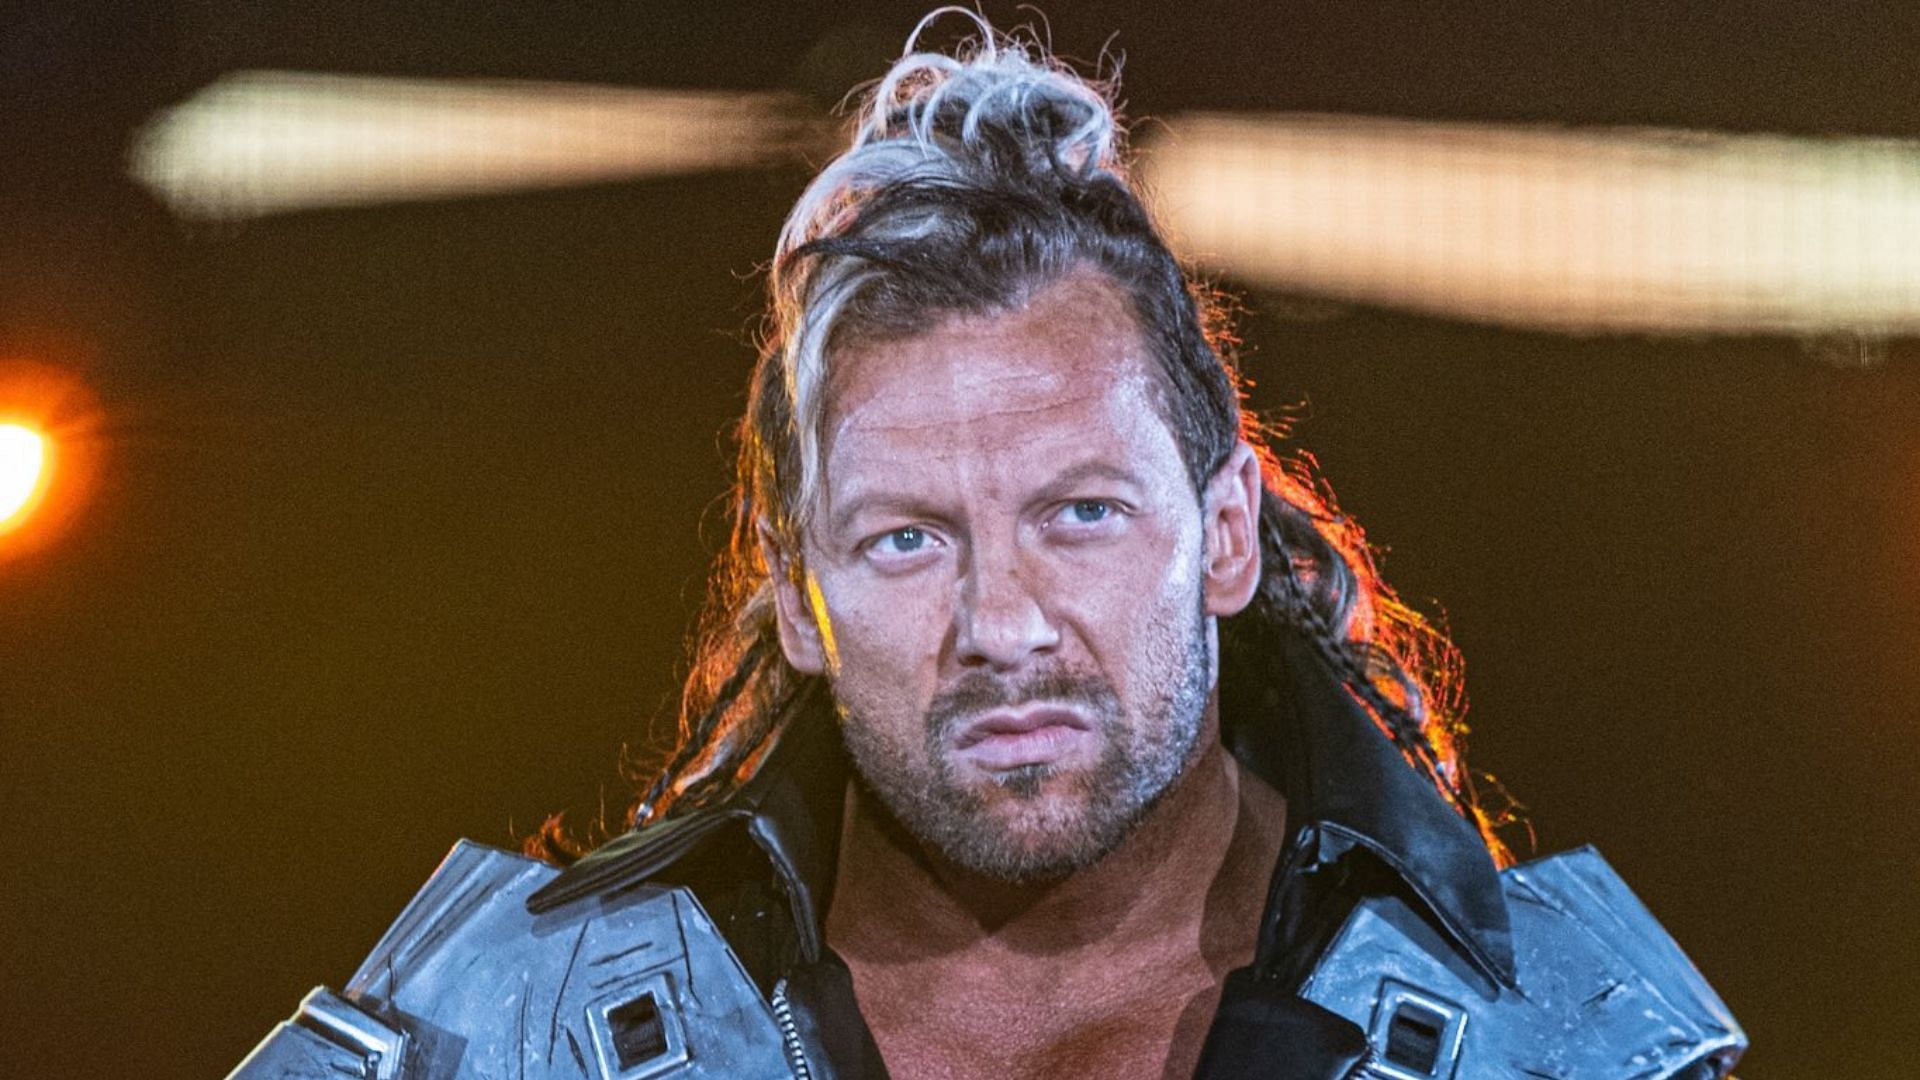 A former AEW star has offered his services to Kenny Omega